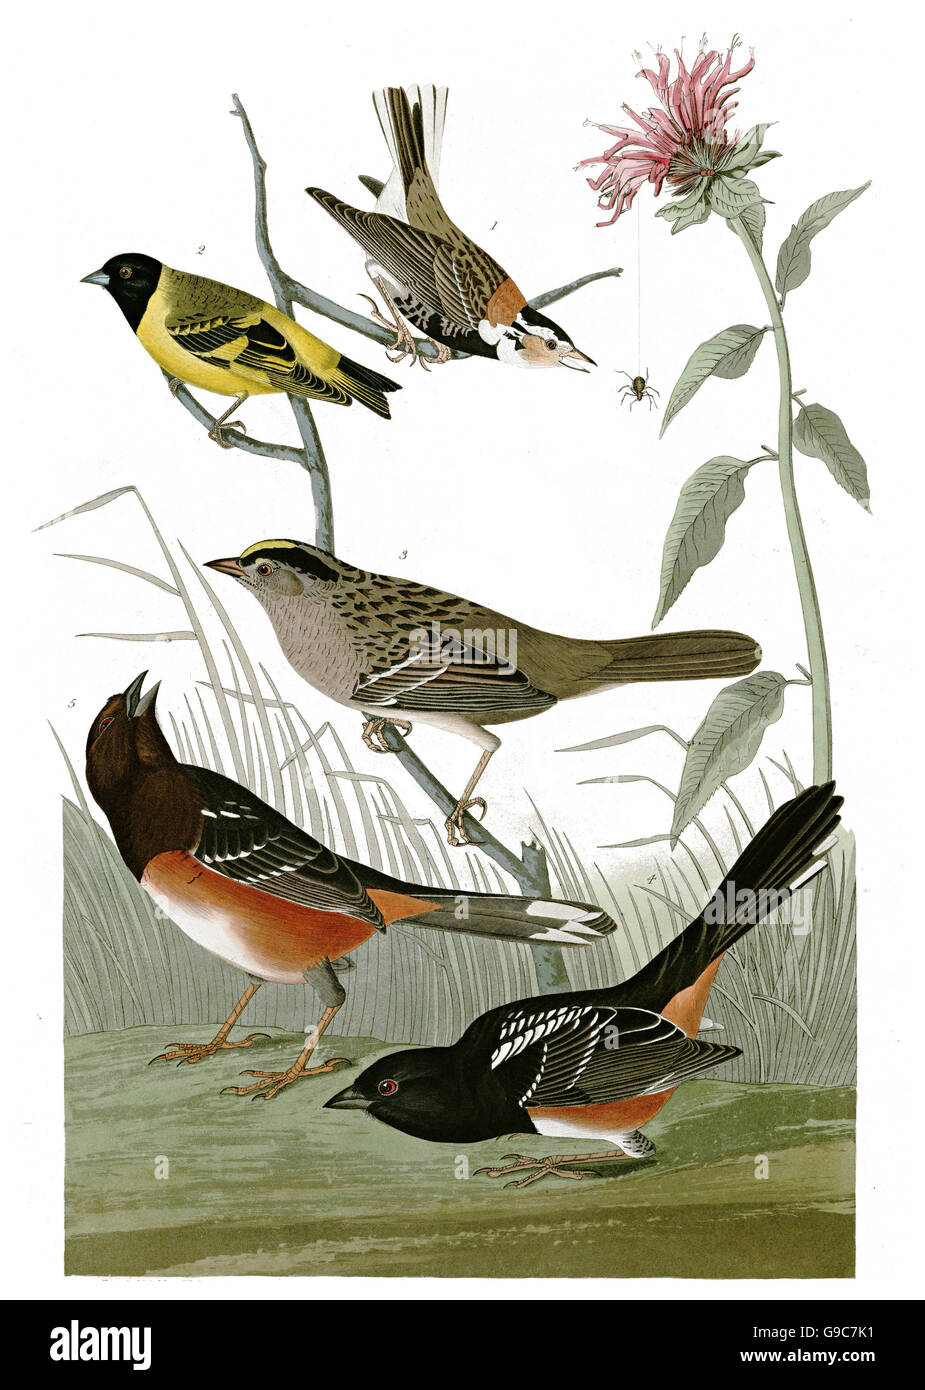 1 Rufous-sided Towhee, Pipilo erythrophthalmus, 2 Golden-crowned sparrow, Zonotrichia atricapilla, 3 Hooded Siskin, Carduelis Stock Photo